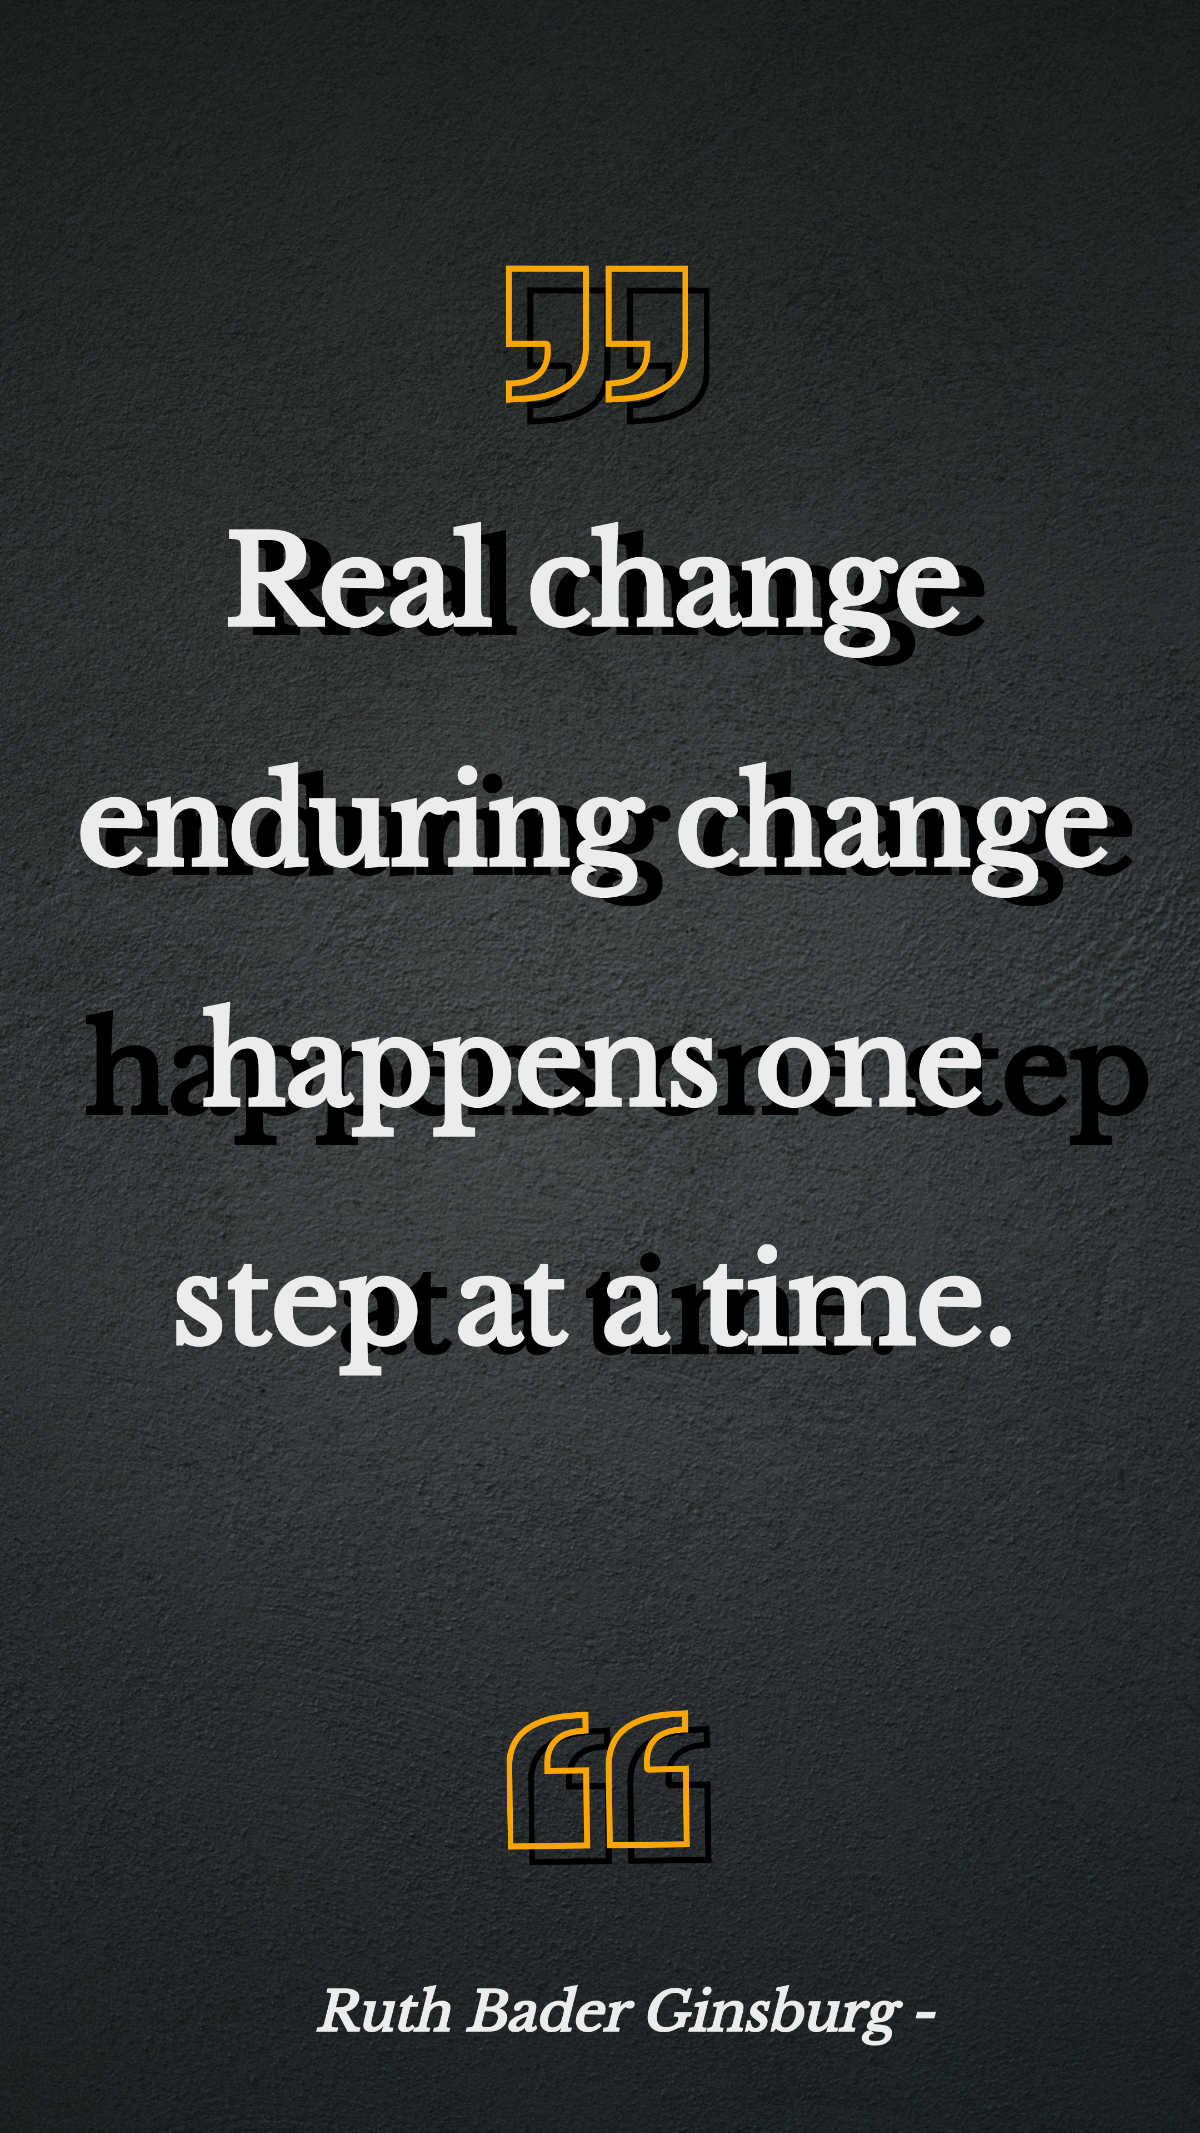 Ruth Bader Ginsburg - Real change enduring change happens one step at a time. Template